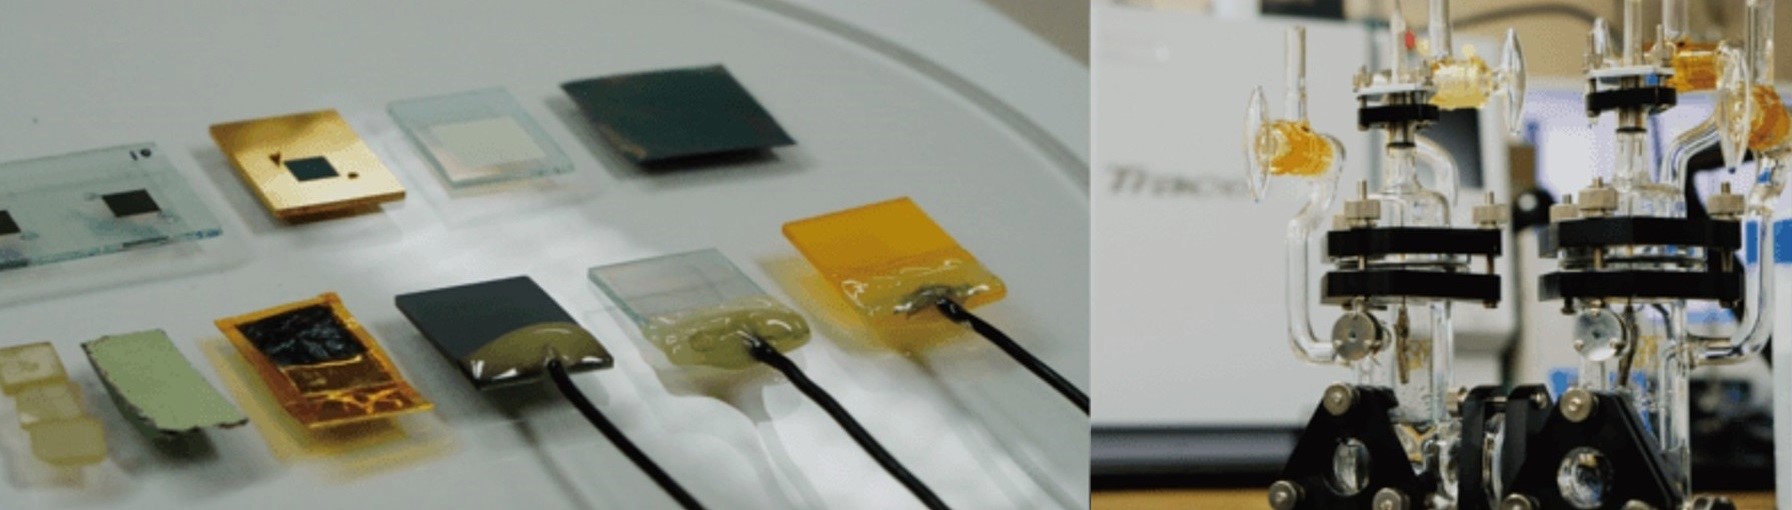 Electrodes fabricated in the lab / Electrolysis experiments in the laboratory